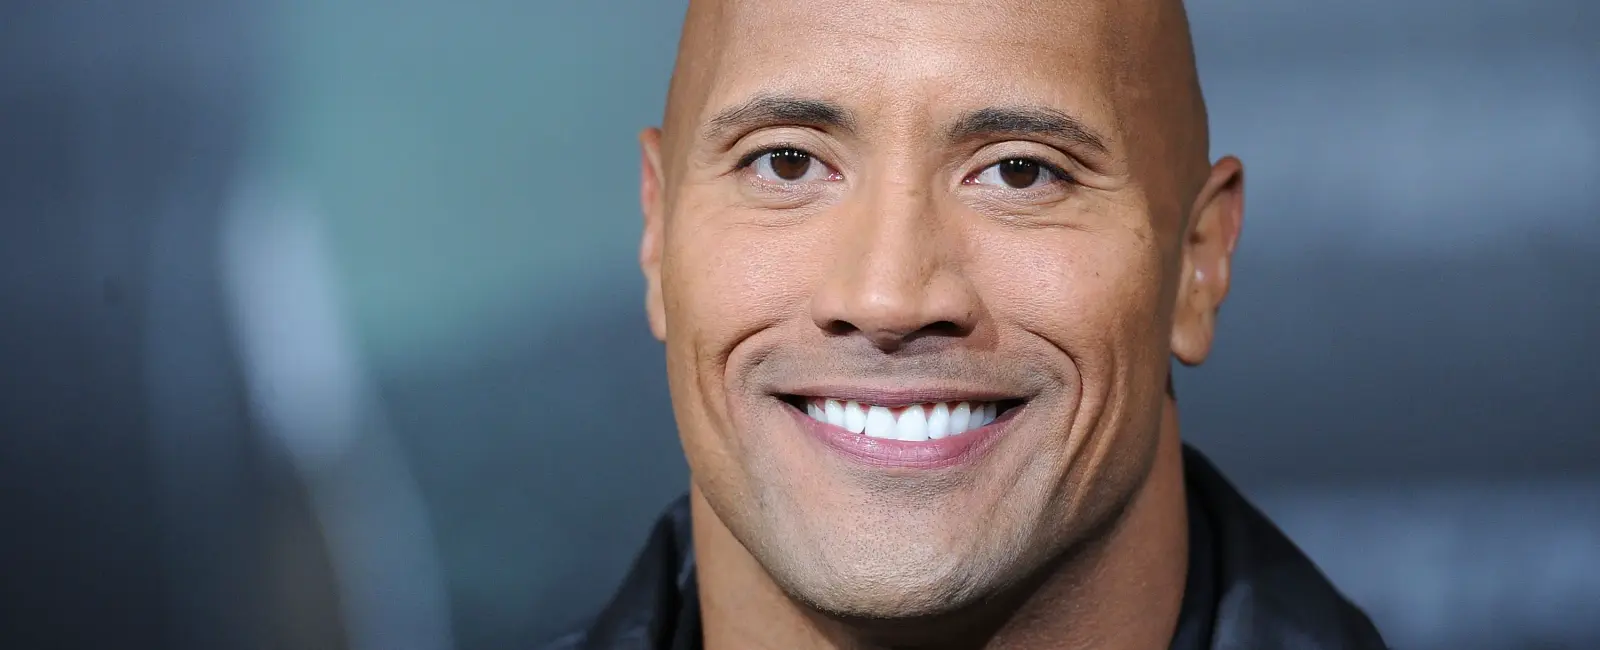 smackdown a word frequently used by dwayne the rock johnson which became part of the public lexicon was added to webster s dictionary in 2007